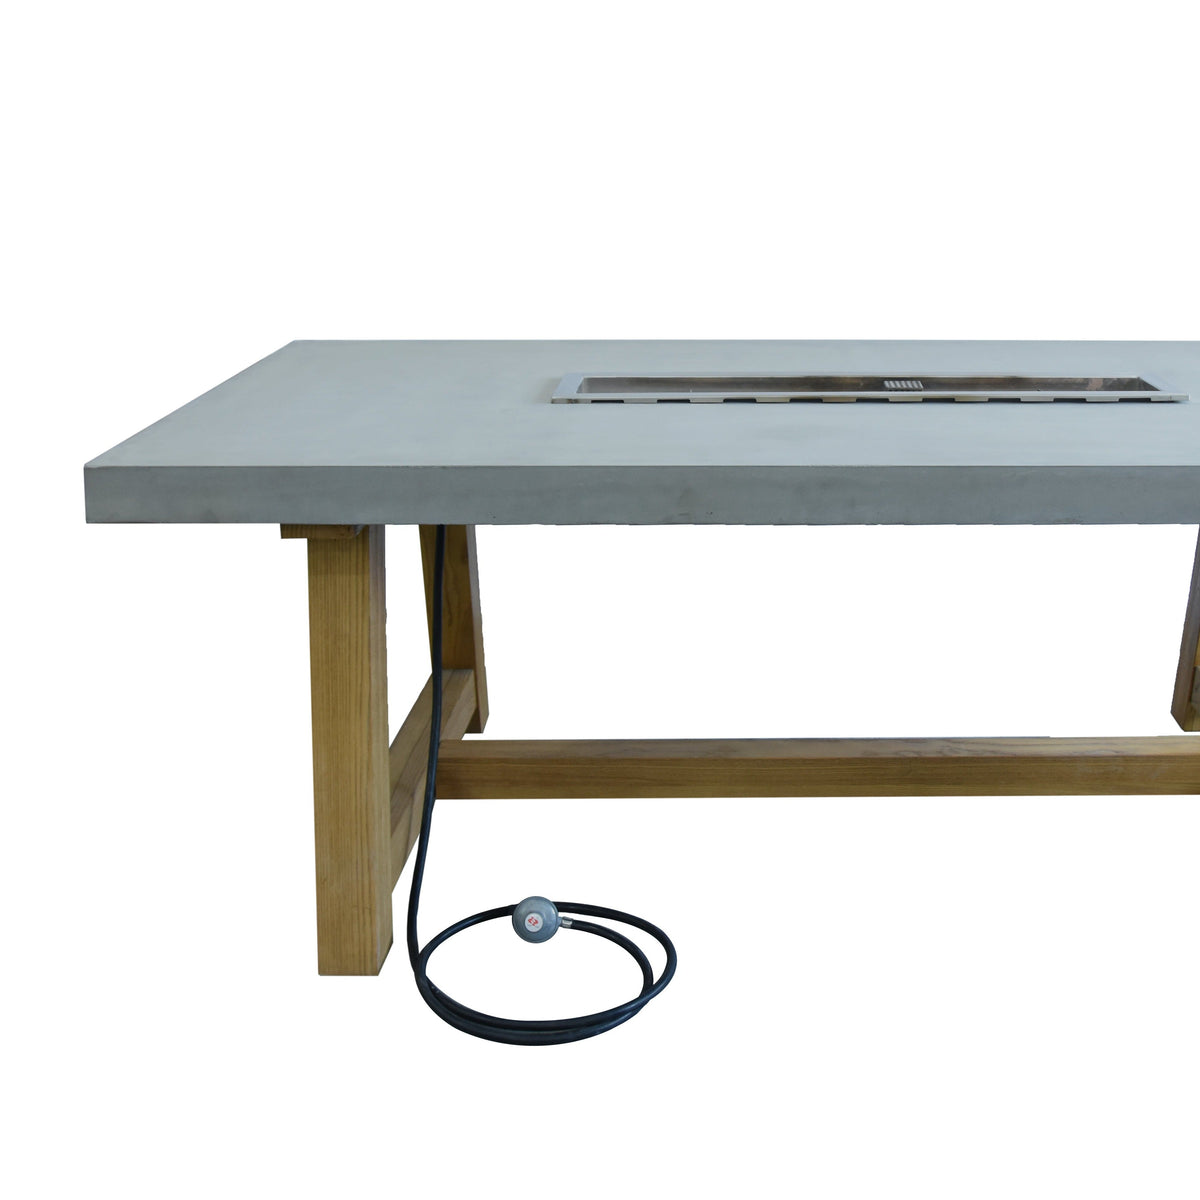 Elementi Sonoma Dining Table with gas hose